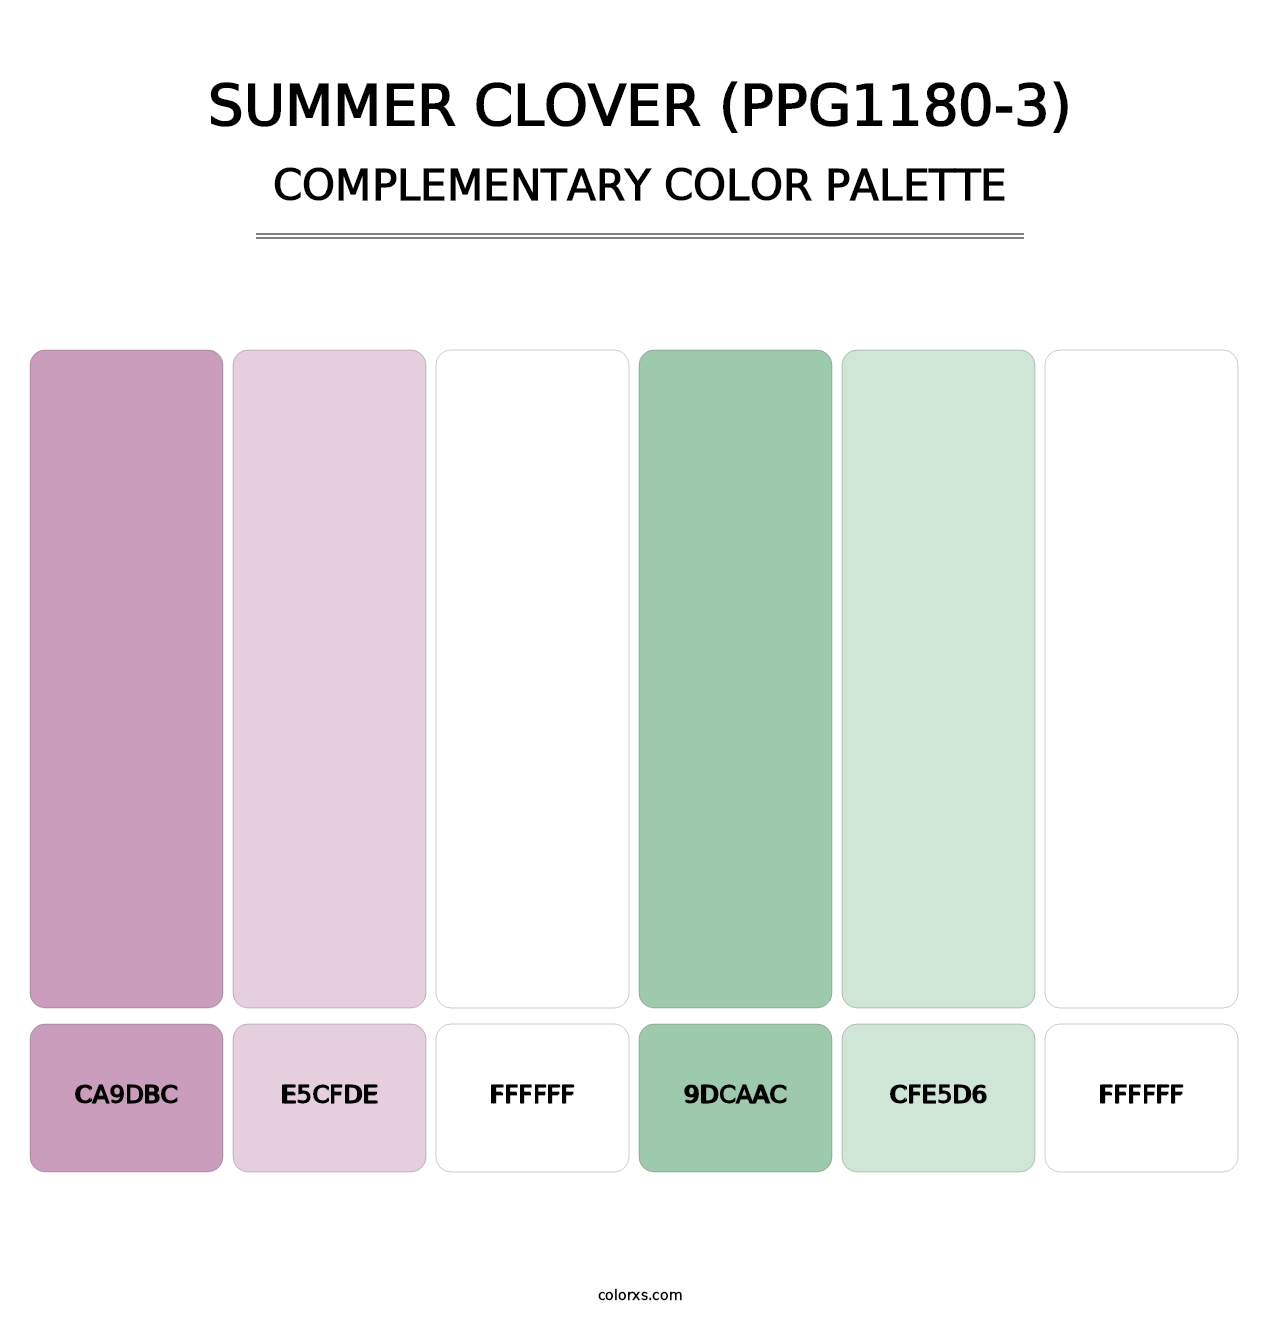 Summer Clover (PPG1180-3) - Complementary Color Palette